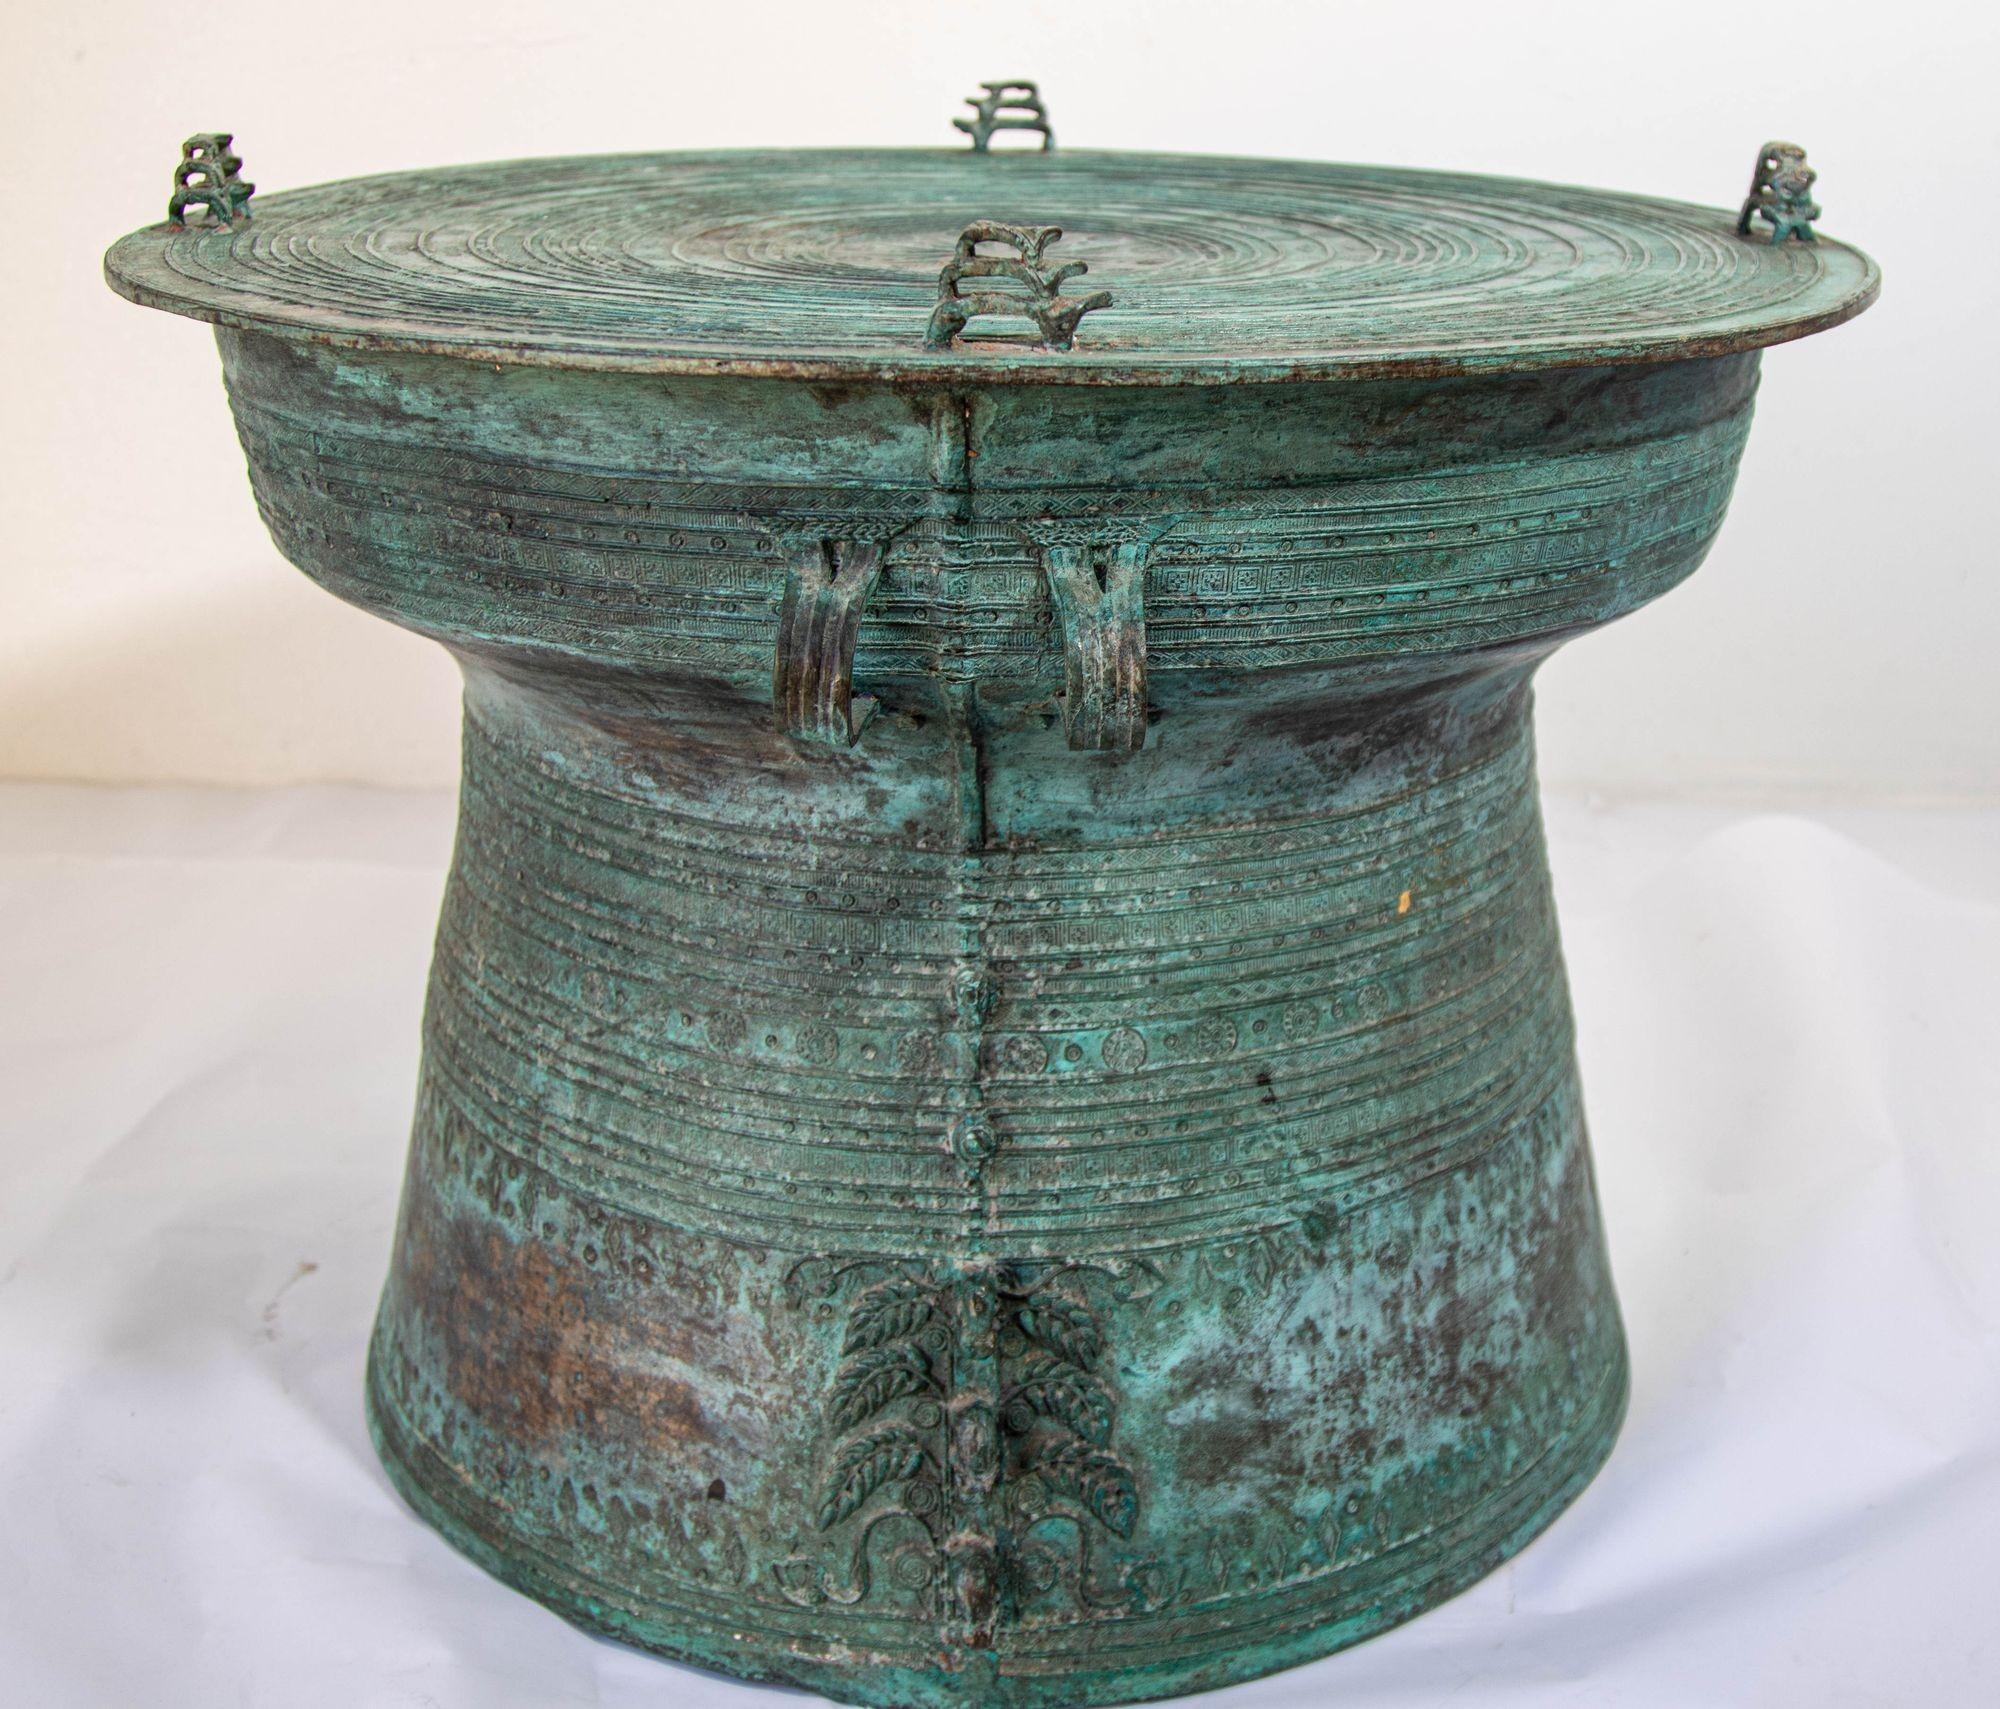 Large Southeast Burmese Bronze Asian Rain Drum Side Table: This impressive 22-inch diameter Asian cast bronze rain drum features intricate detailing with traditional geometric relief motifs.
The body and top display precise patterns, including